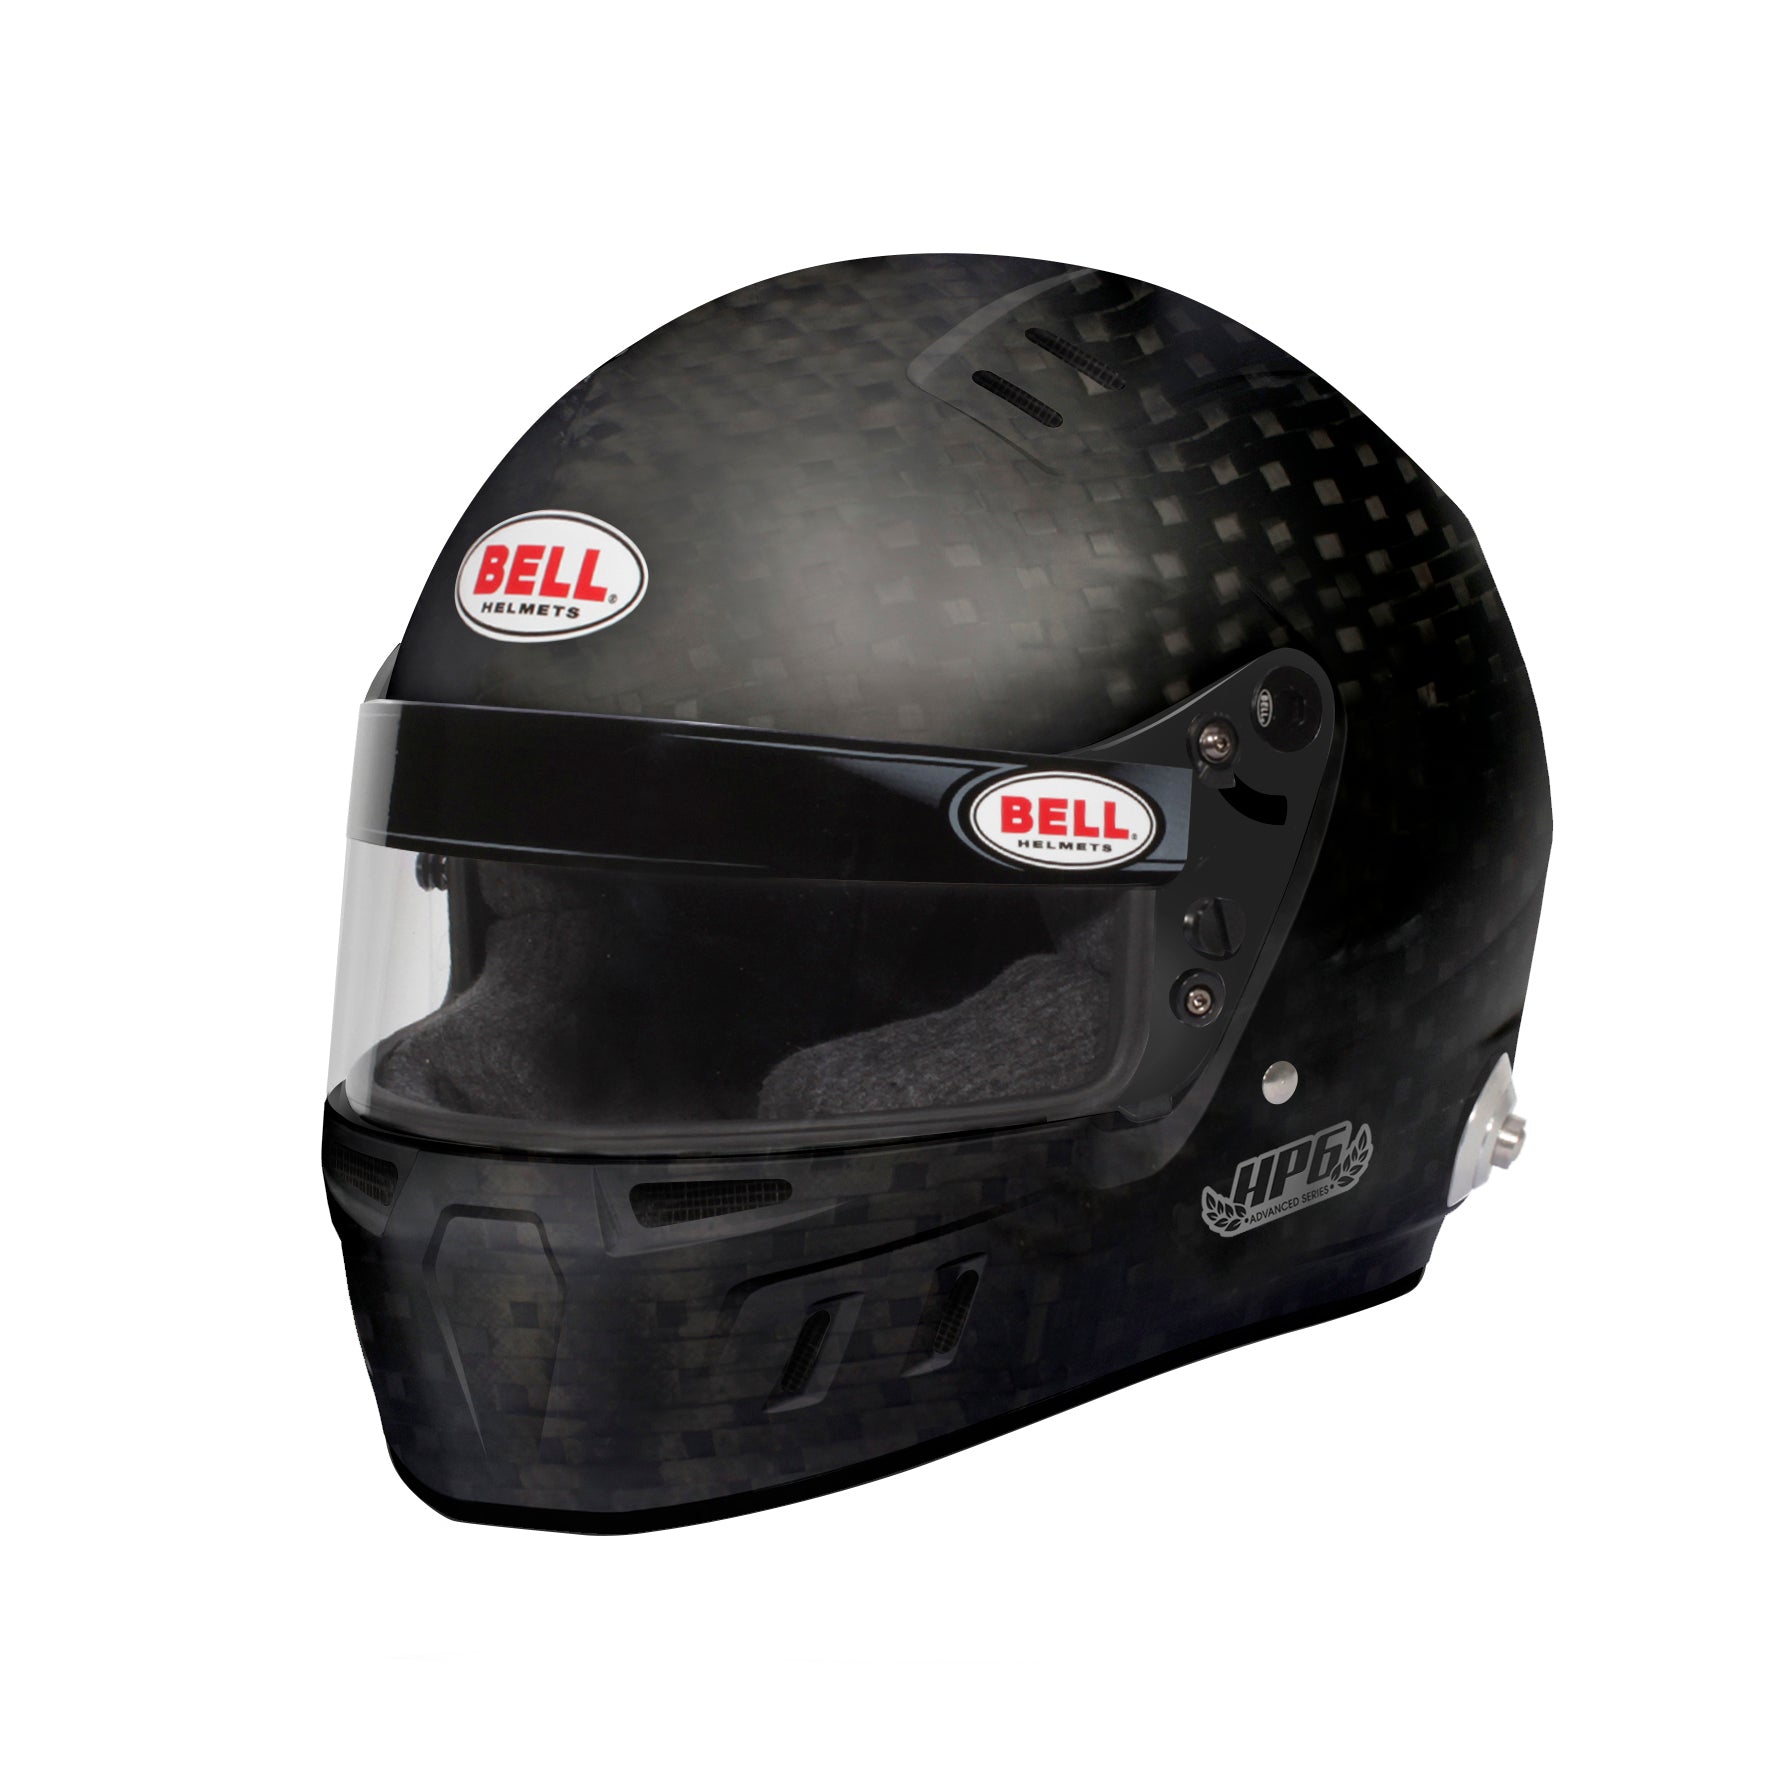 BELL 1140006 HP6 Racing helmet full-face, HANS, FIA8860-2018, carbon, size 59 (7 3/8) Photo-0 